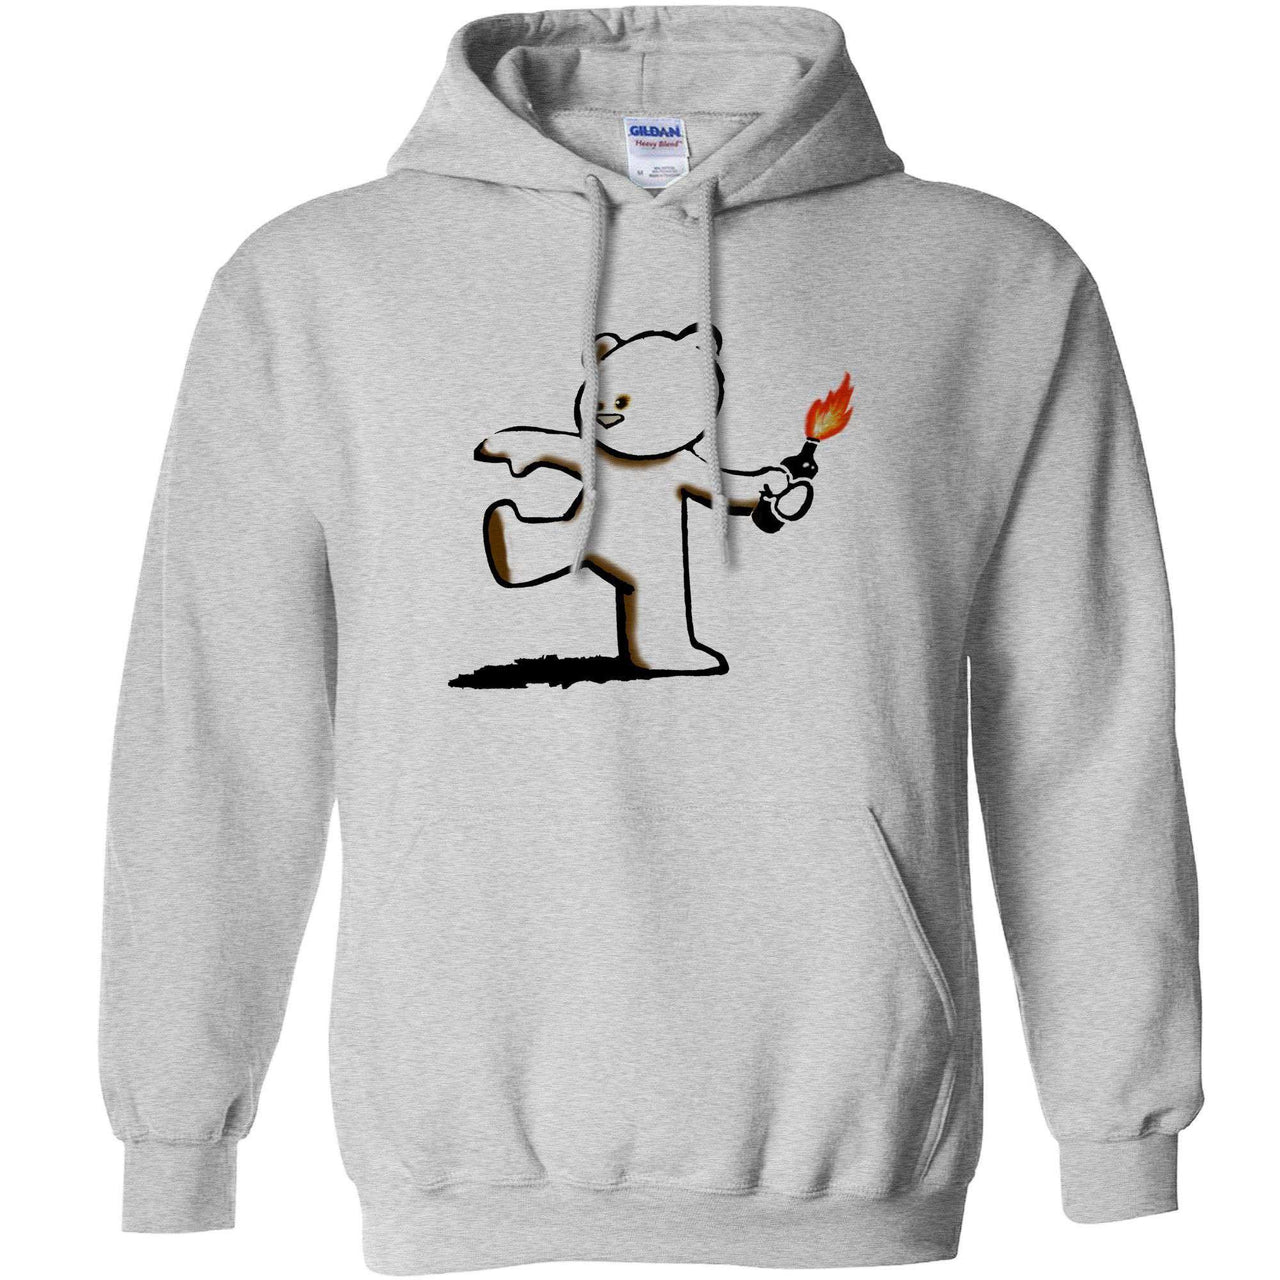 Banksy Teddy Hoodie For Men and Women 8Ball